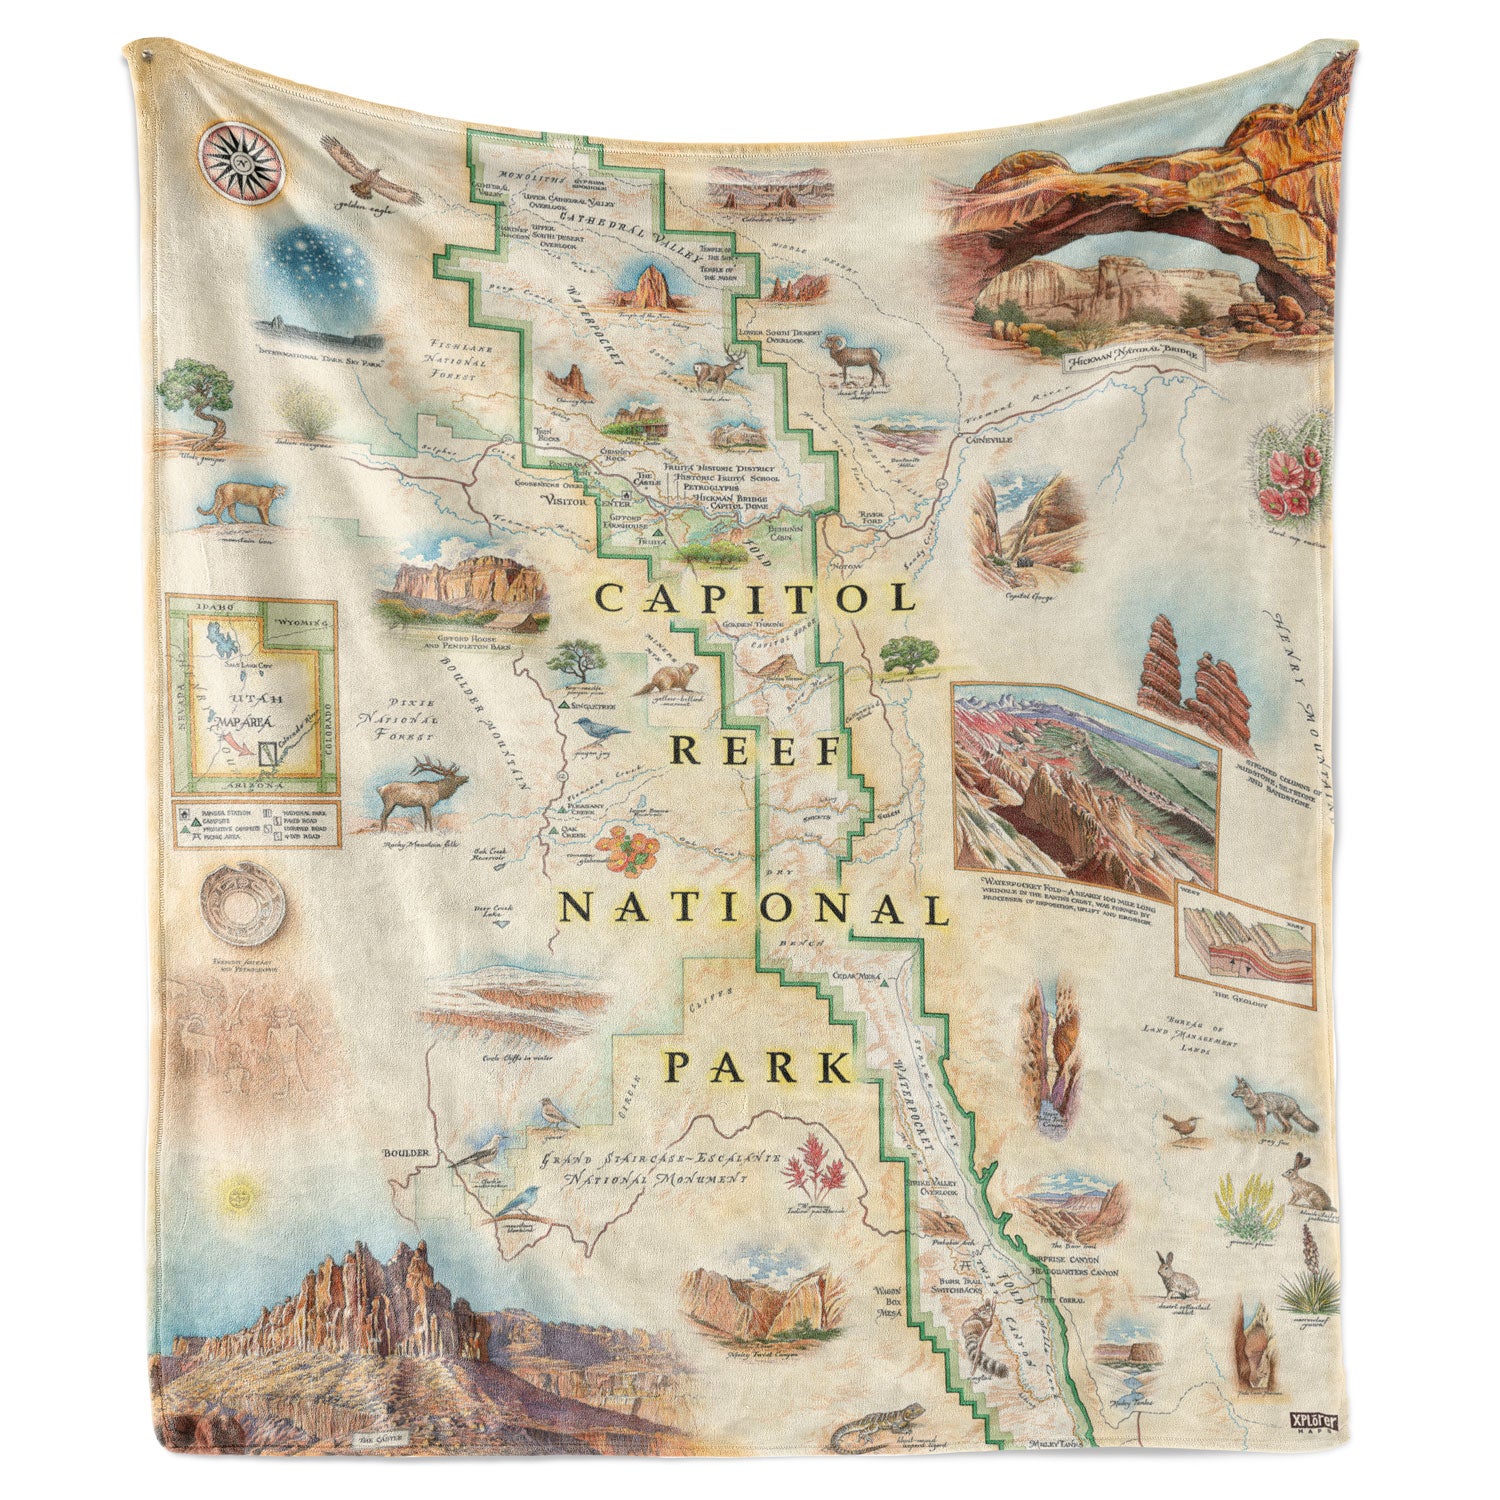 Hanging fleece blanket with Capitol Reef National Park map hand drawn and painted. Measures 58